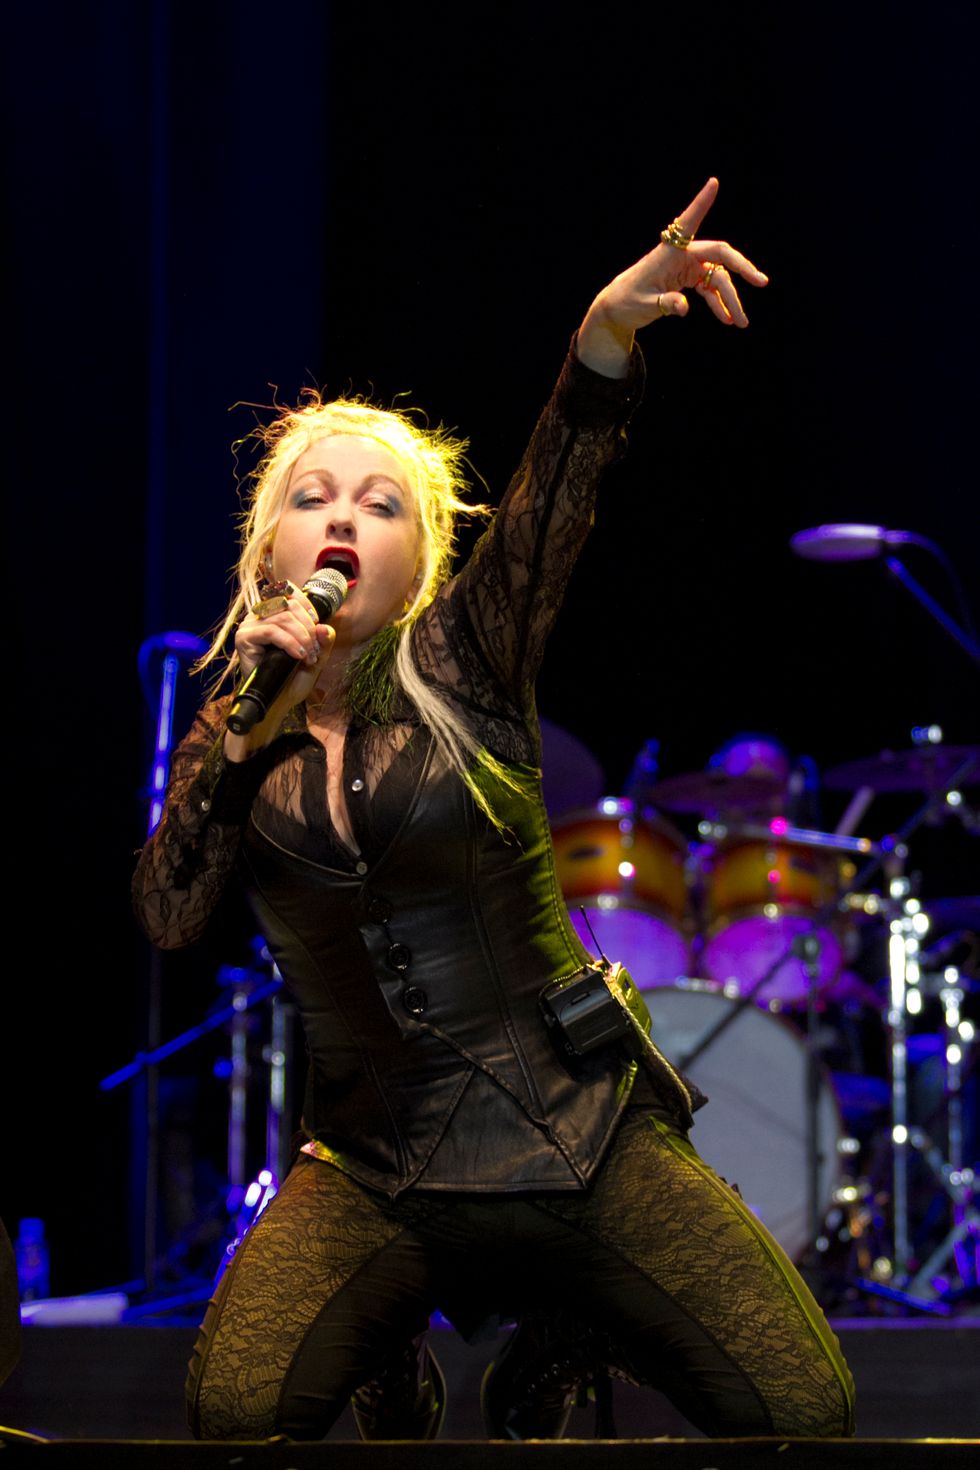 Catch Cyndi Lauper at the Mountain Winery June 19th!